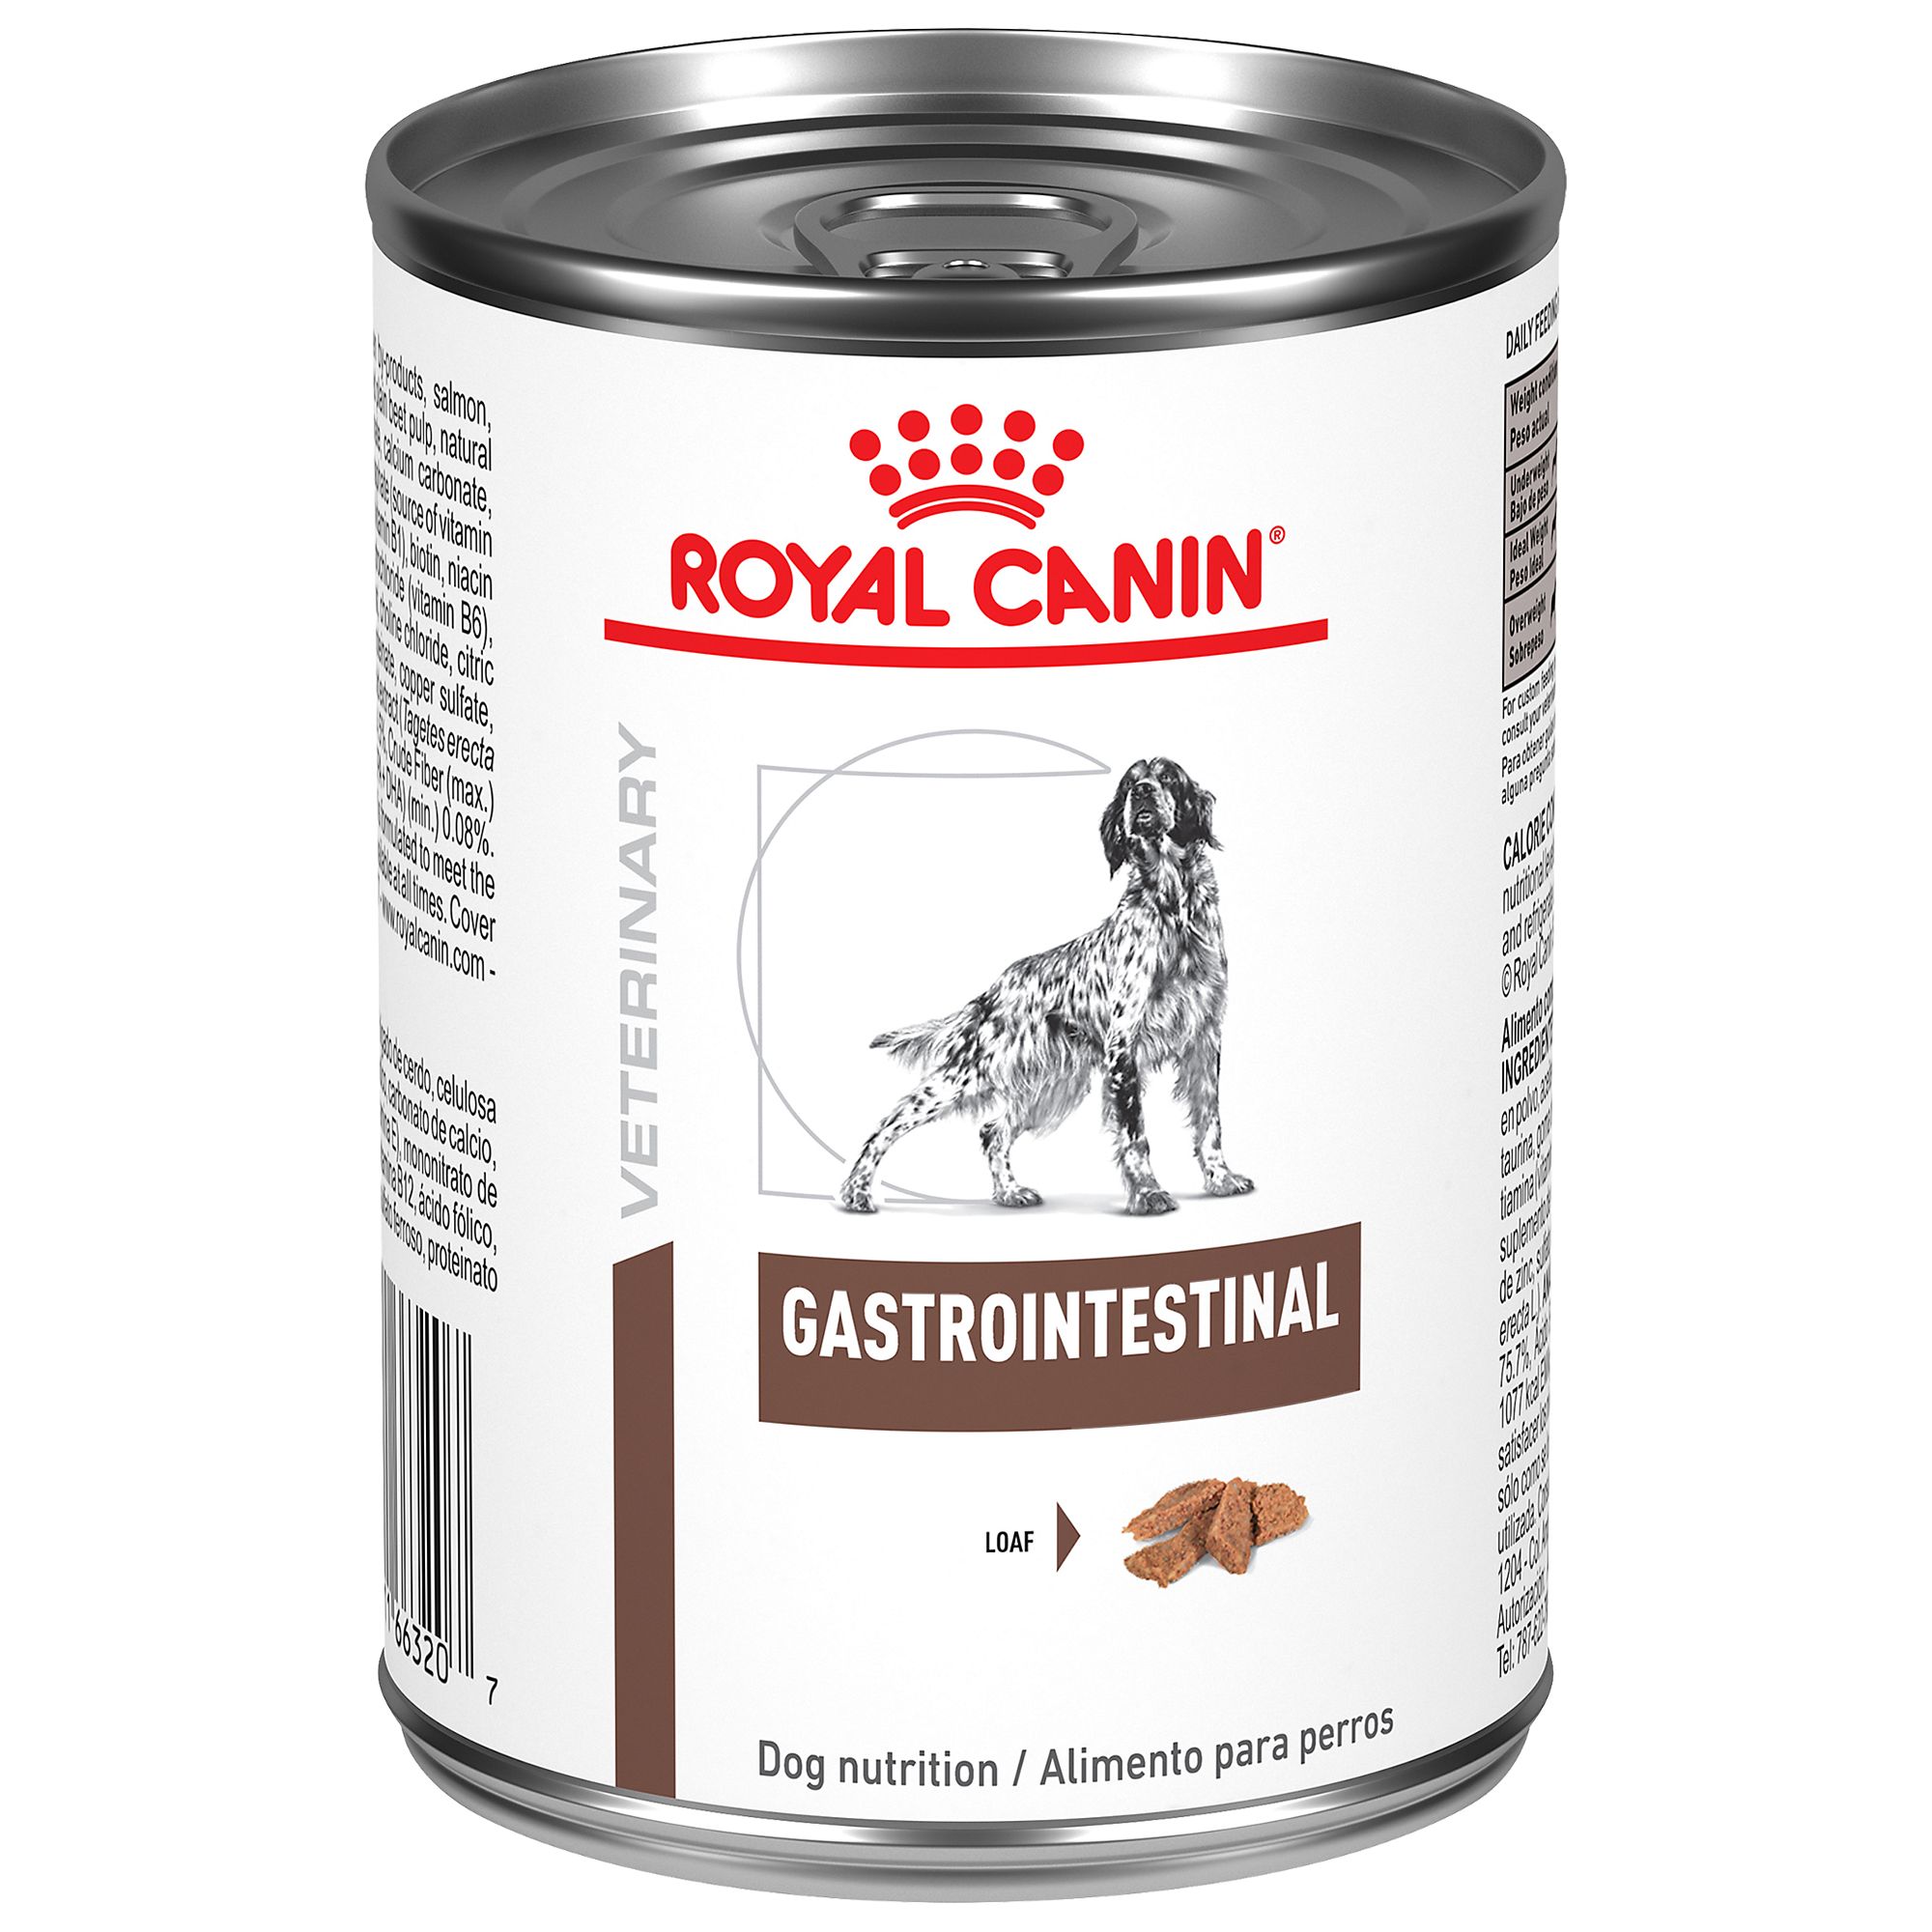 royal canin stage 2 high calorie